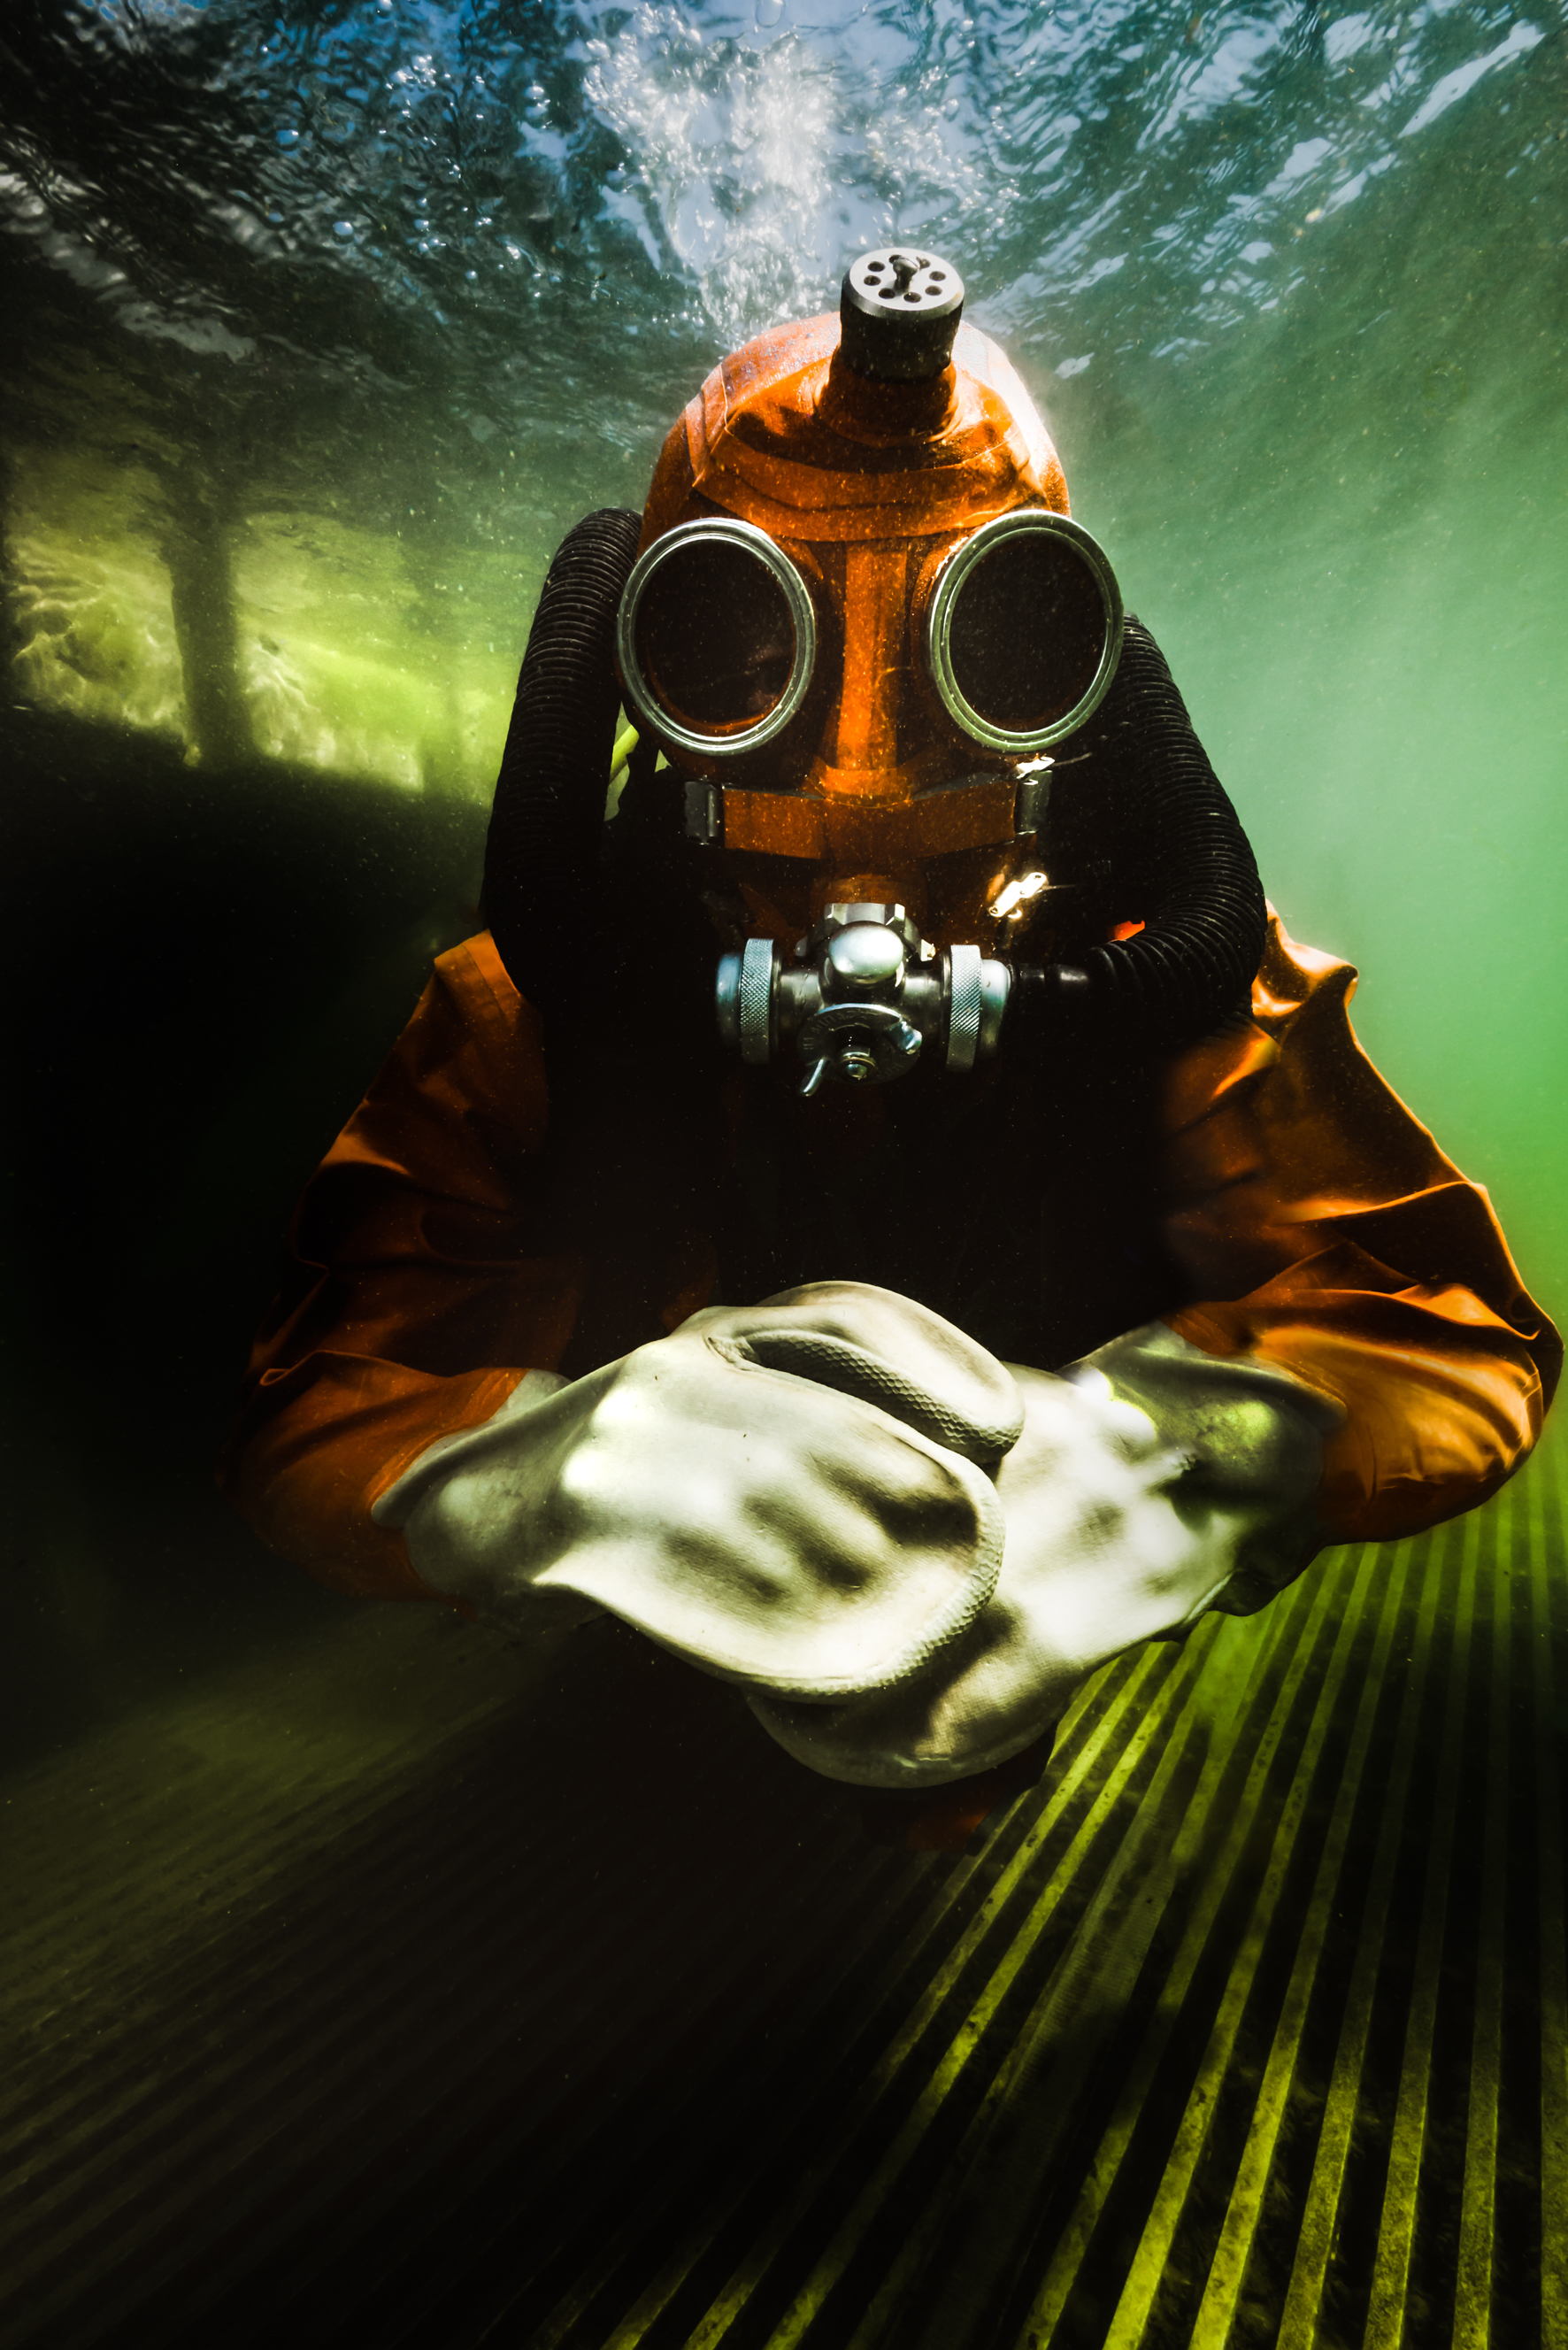 Diver in Russian protective suit. Photo by Jennifer Idol